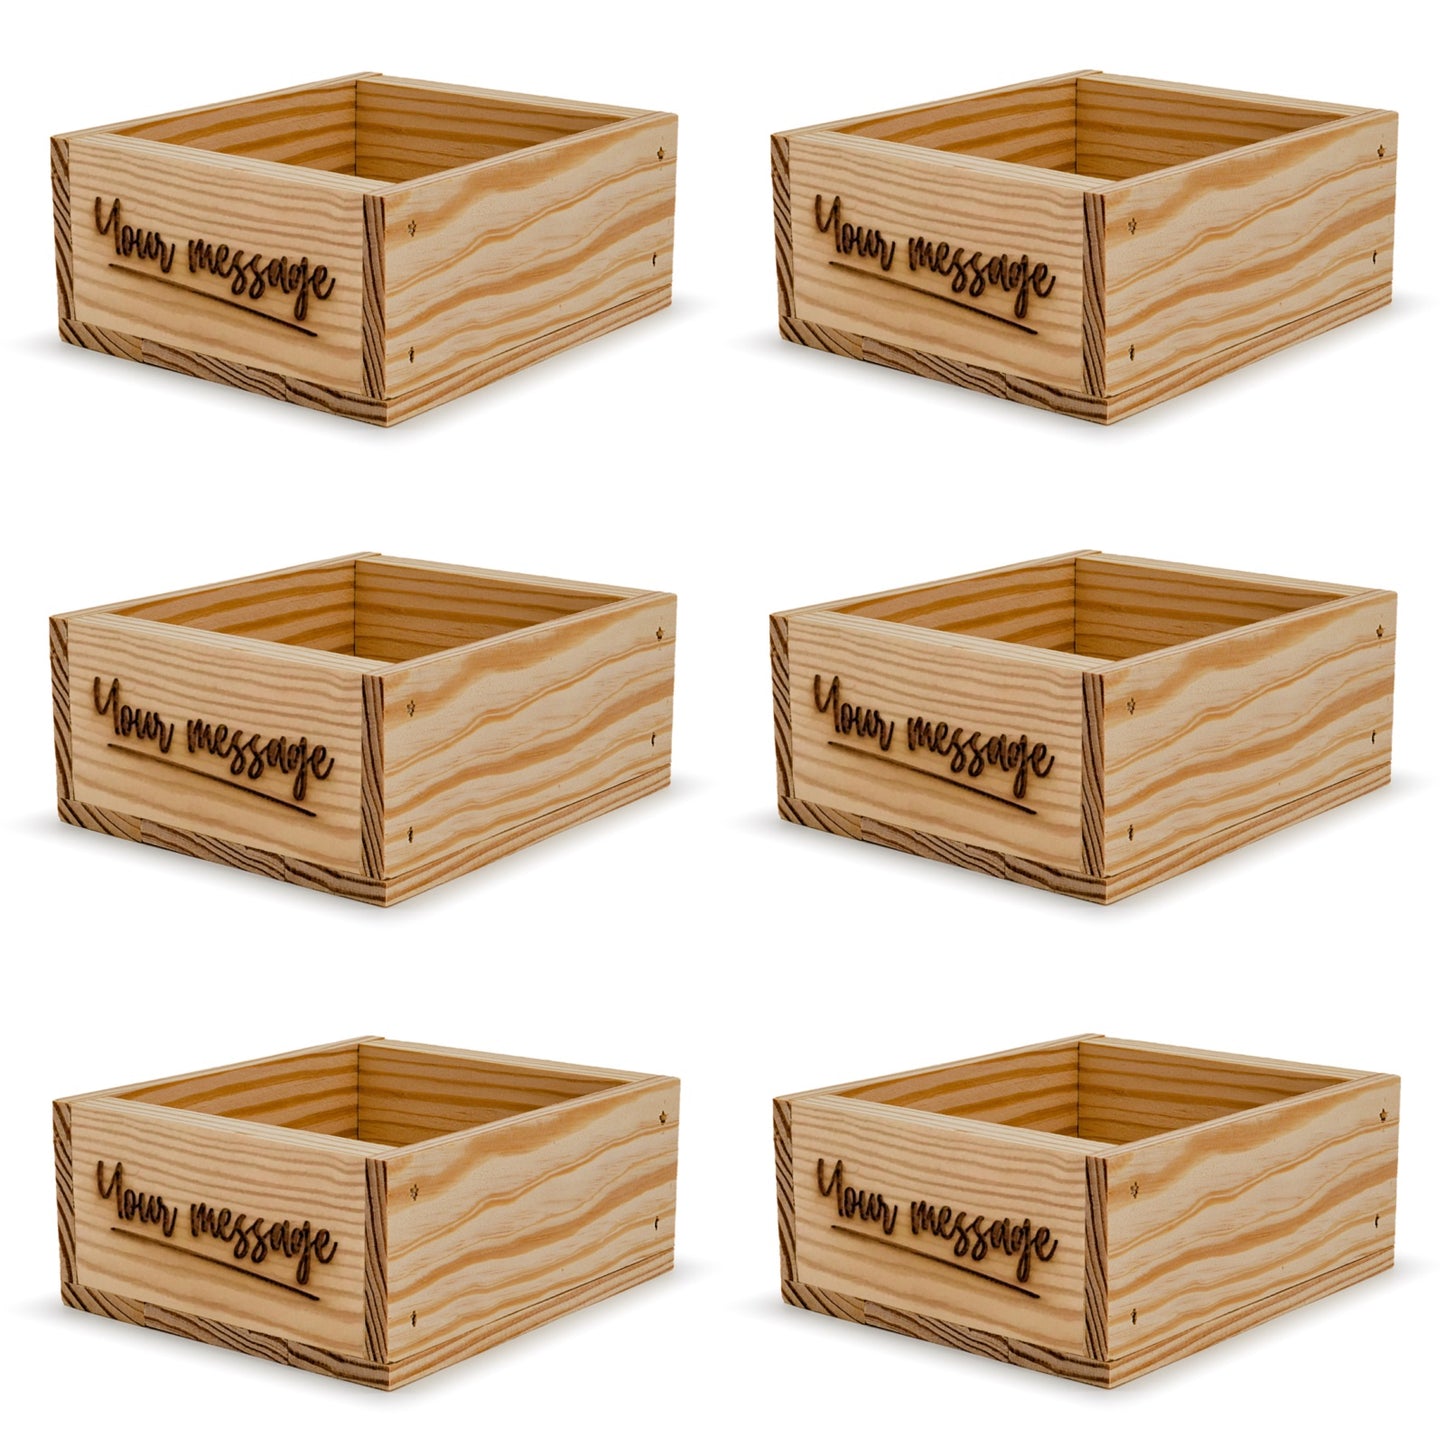 6 Small wooden crates with custom message 6x5.5x2.75